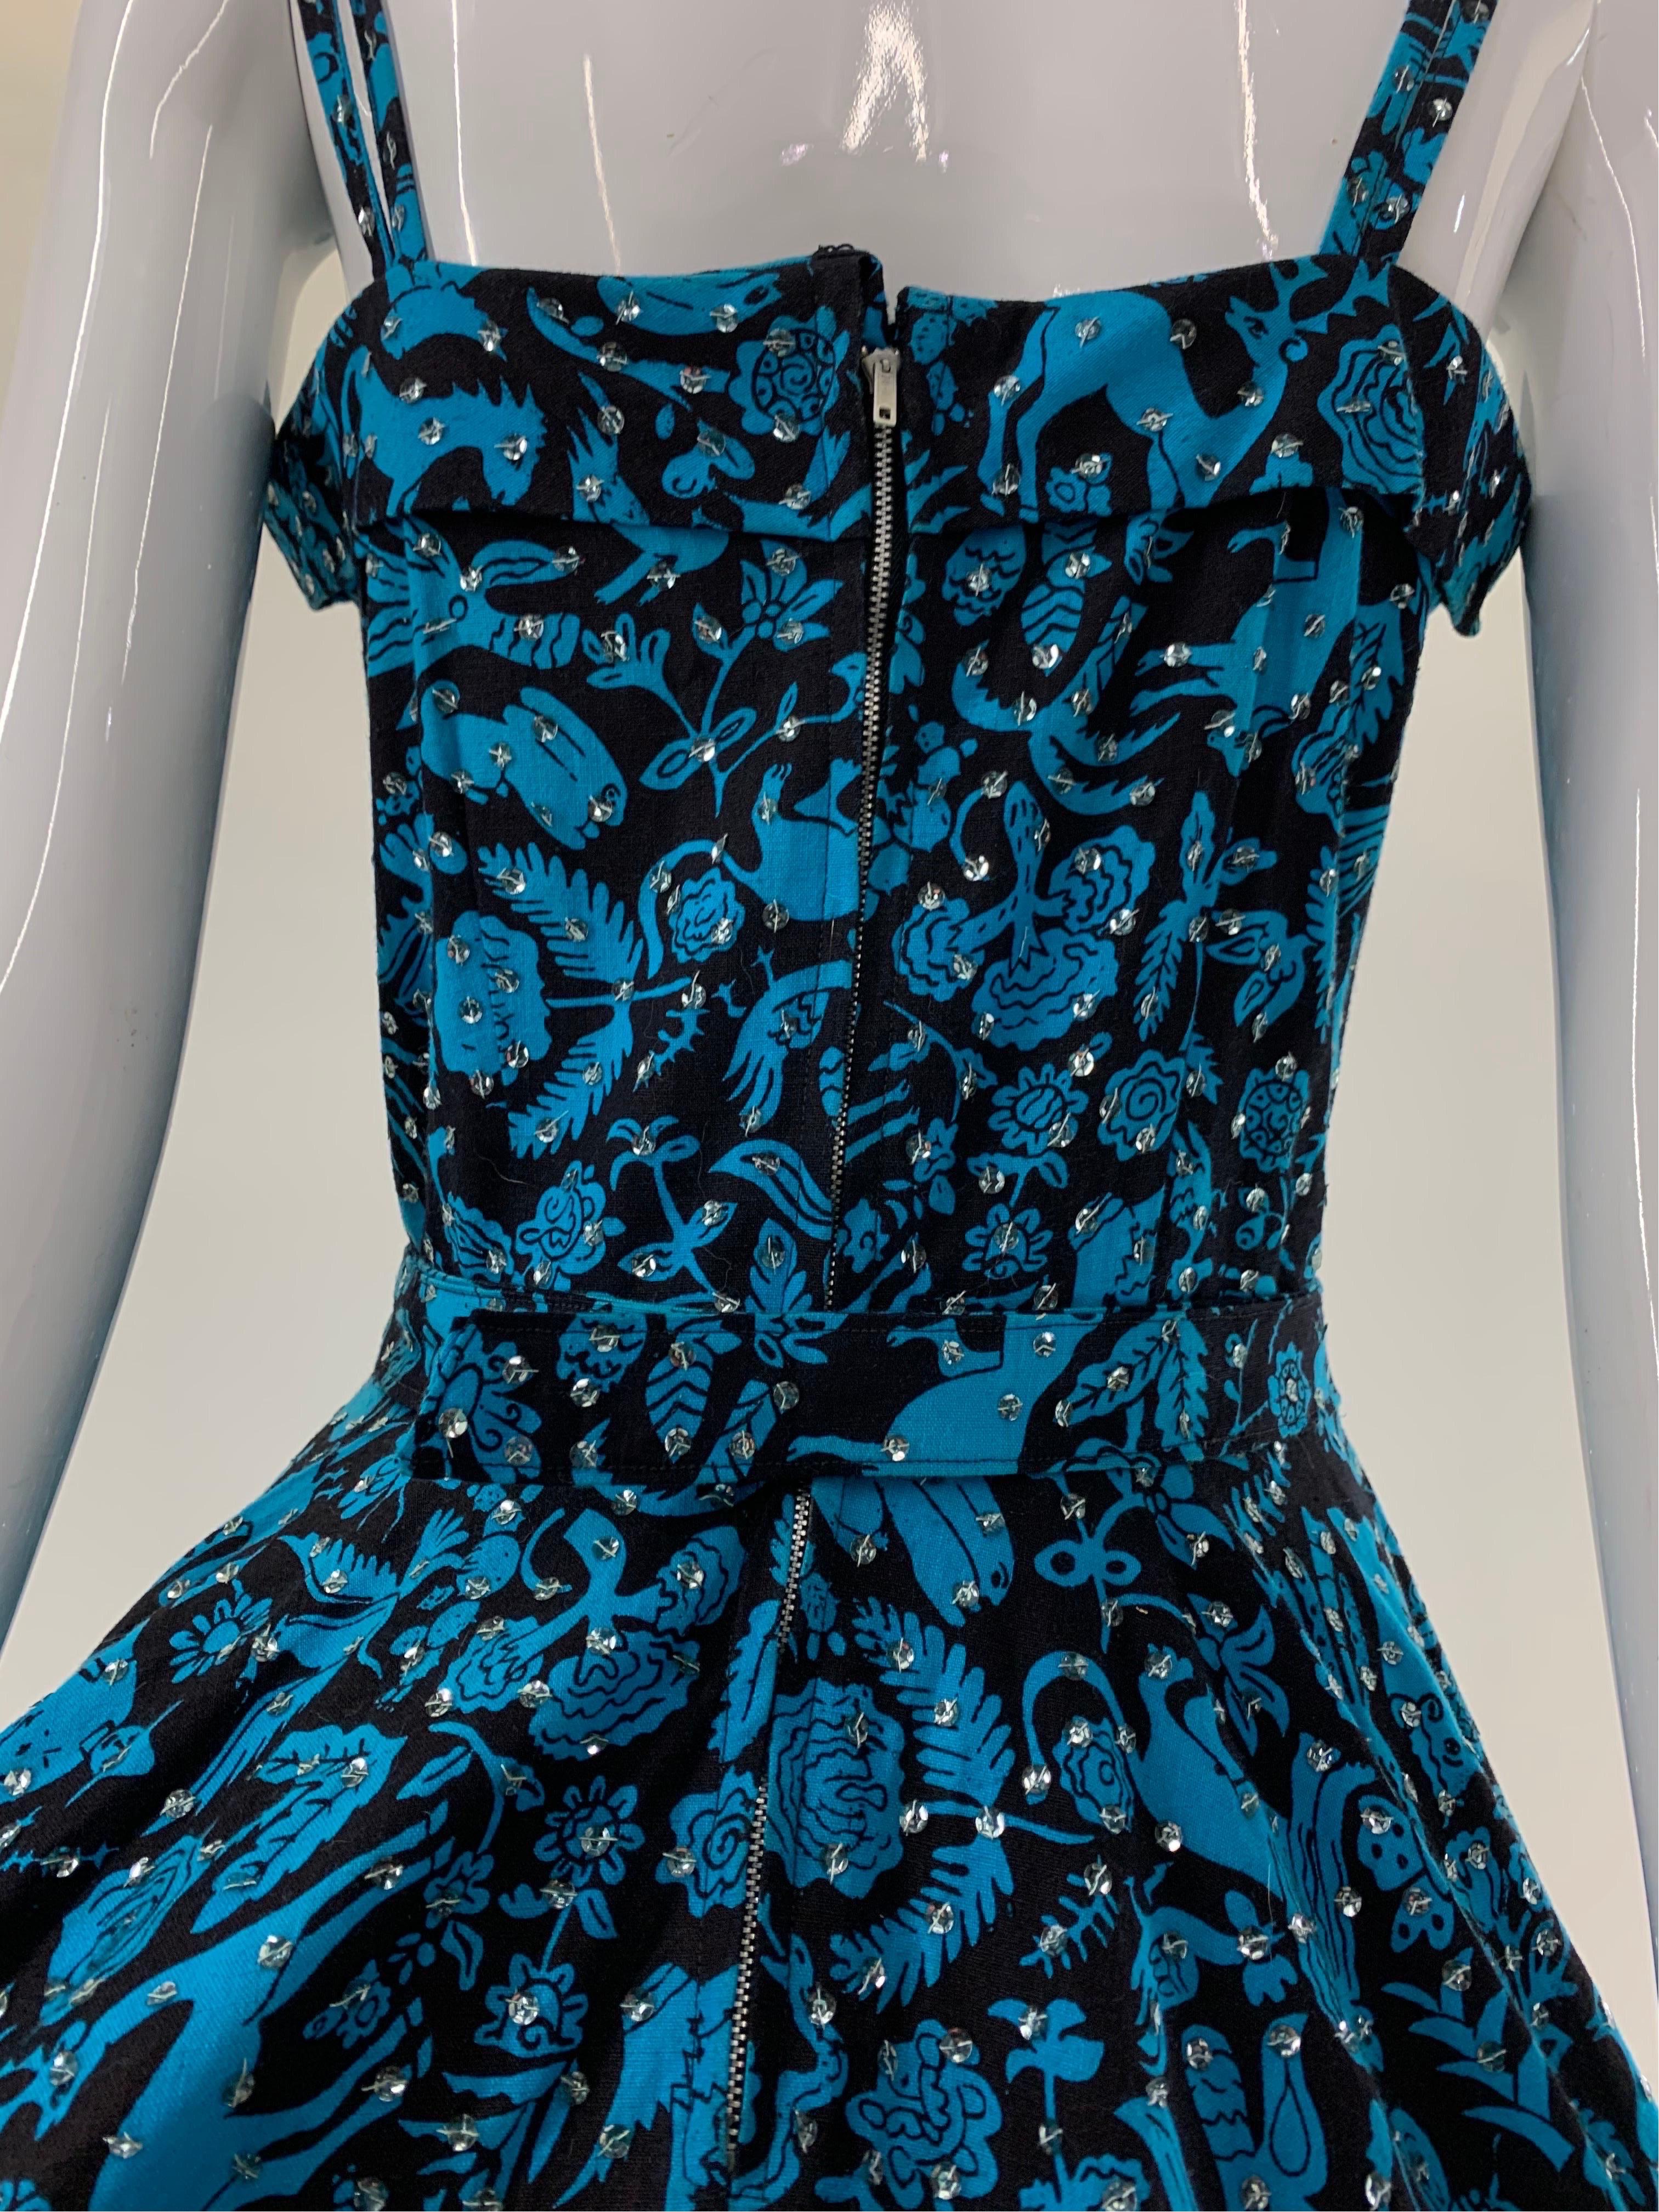 1950s Turquoise & Black Folkloric Print Cotton Summer Dress w/ Scattered Sequins For Sale 4